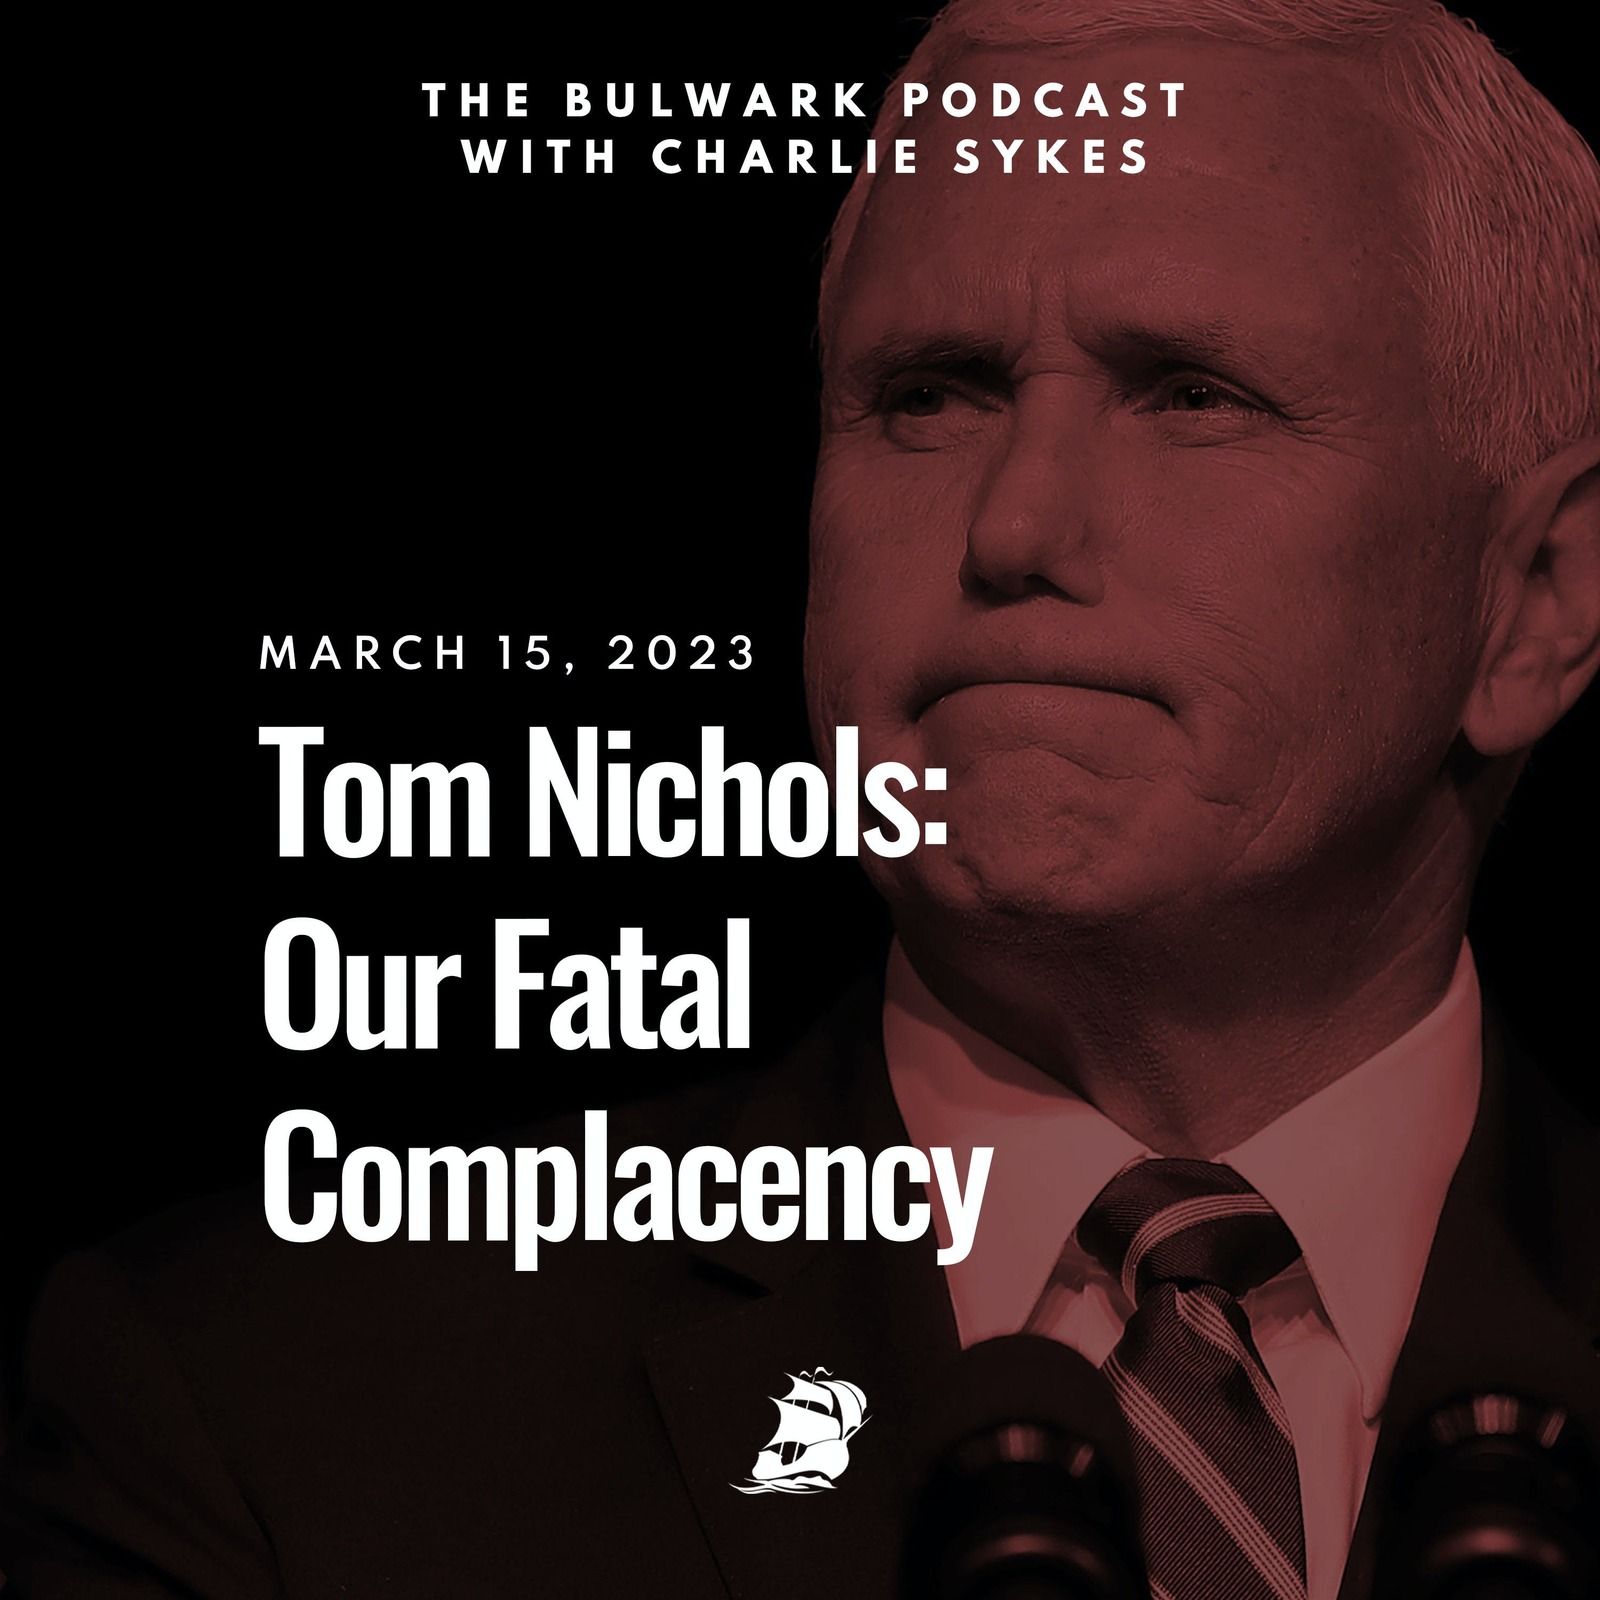 Tom Nichols: Our Fatal Complacency